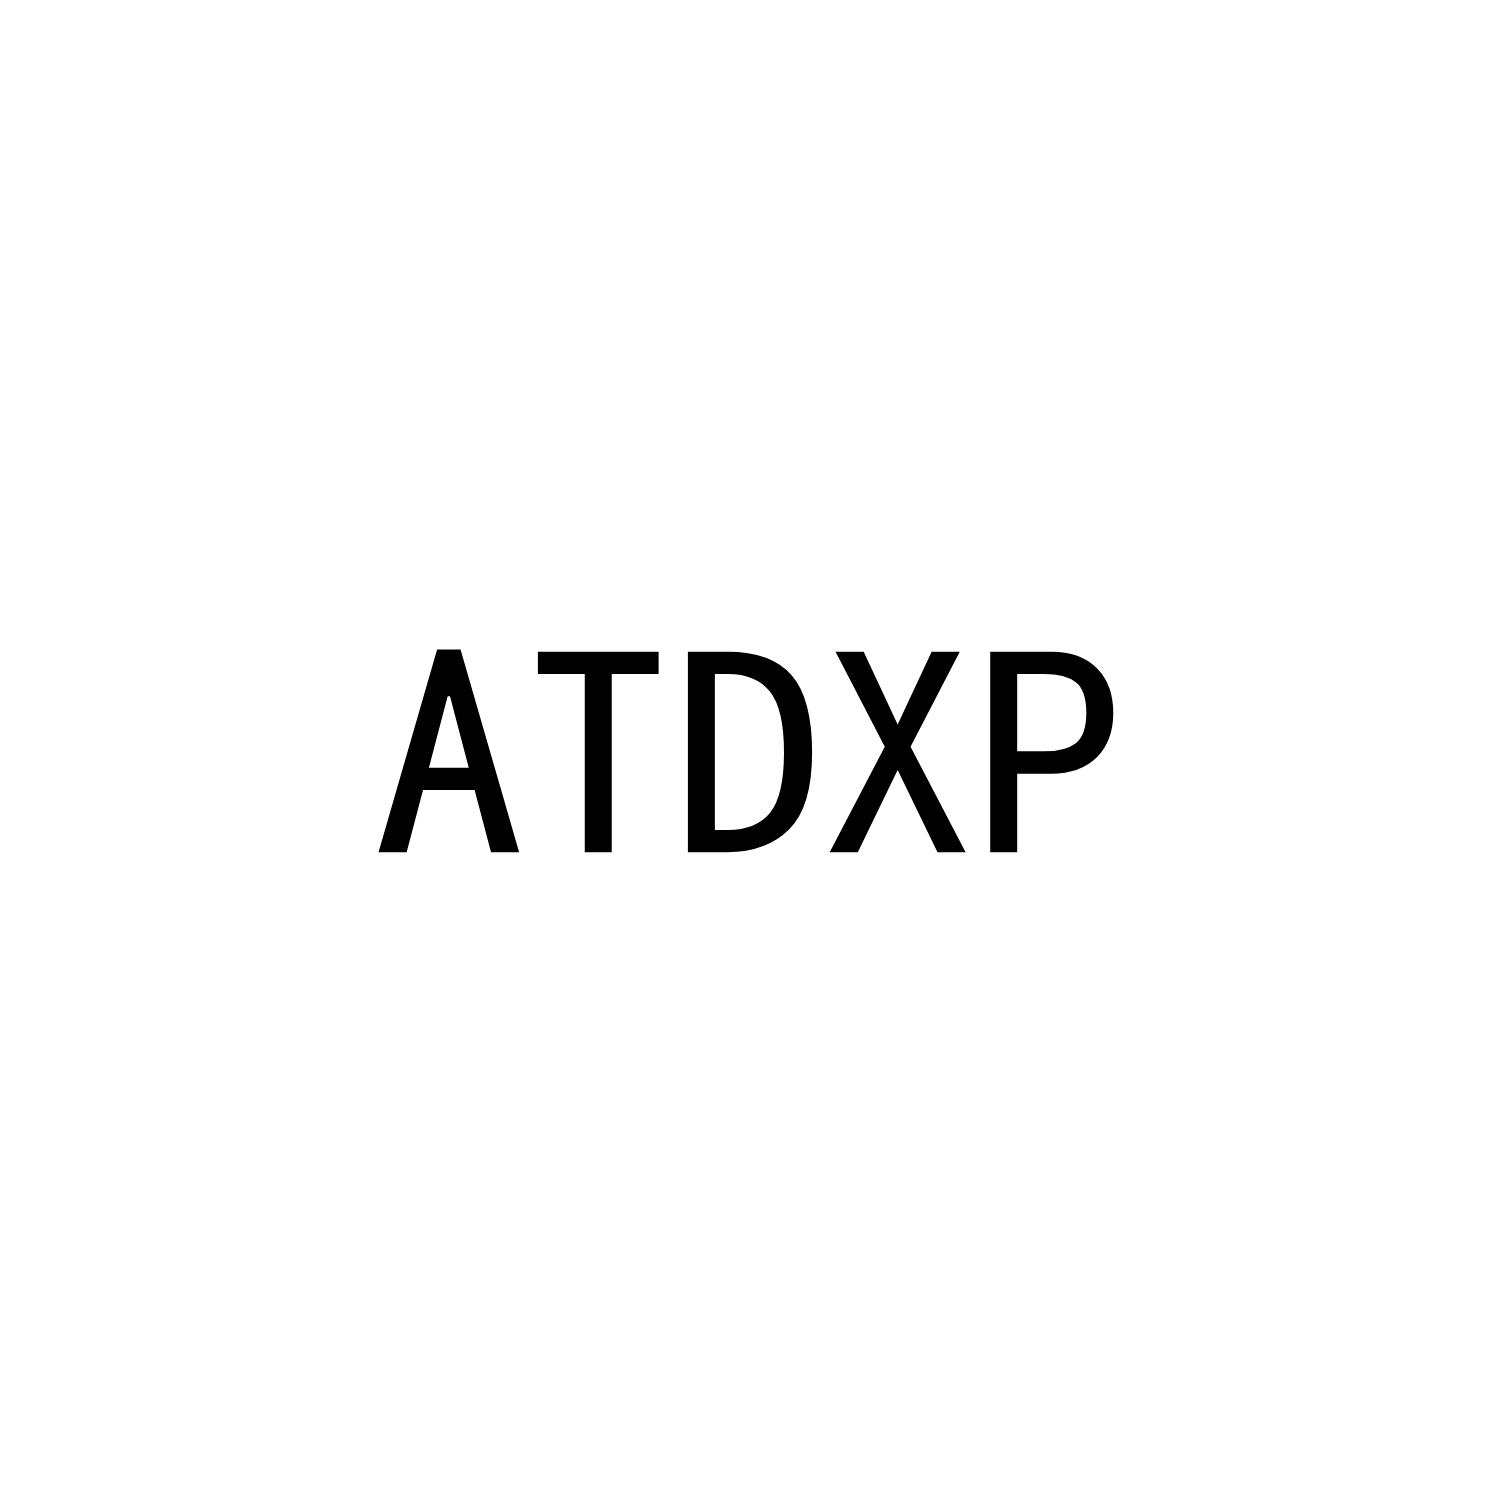 ATDXP